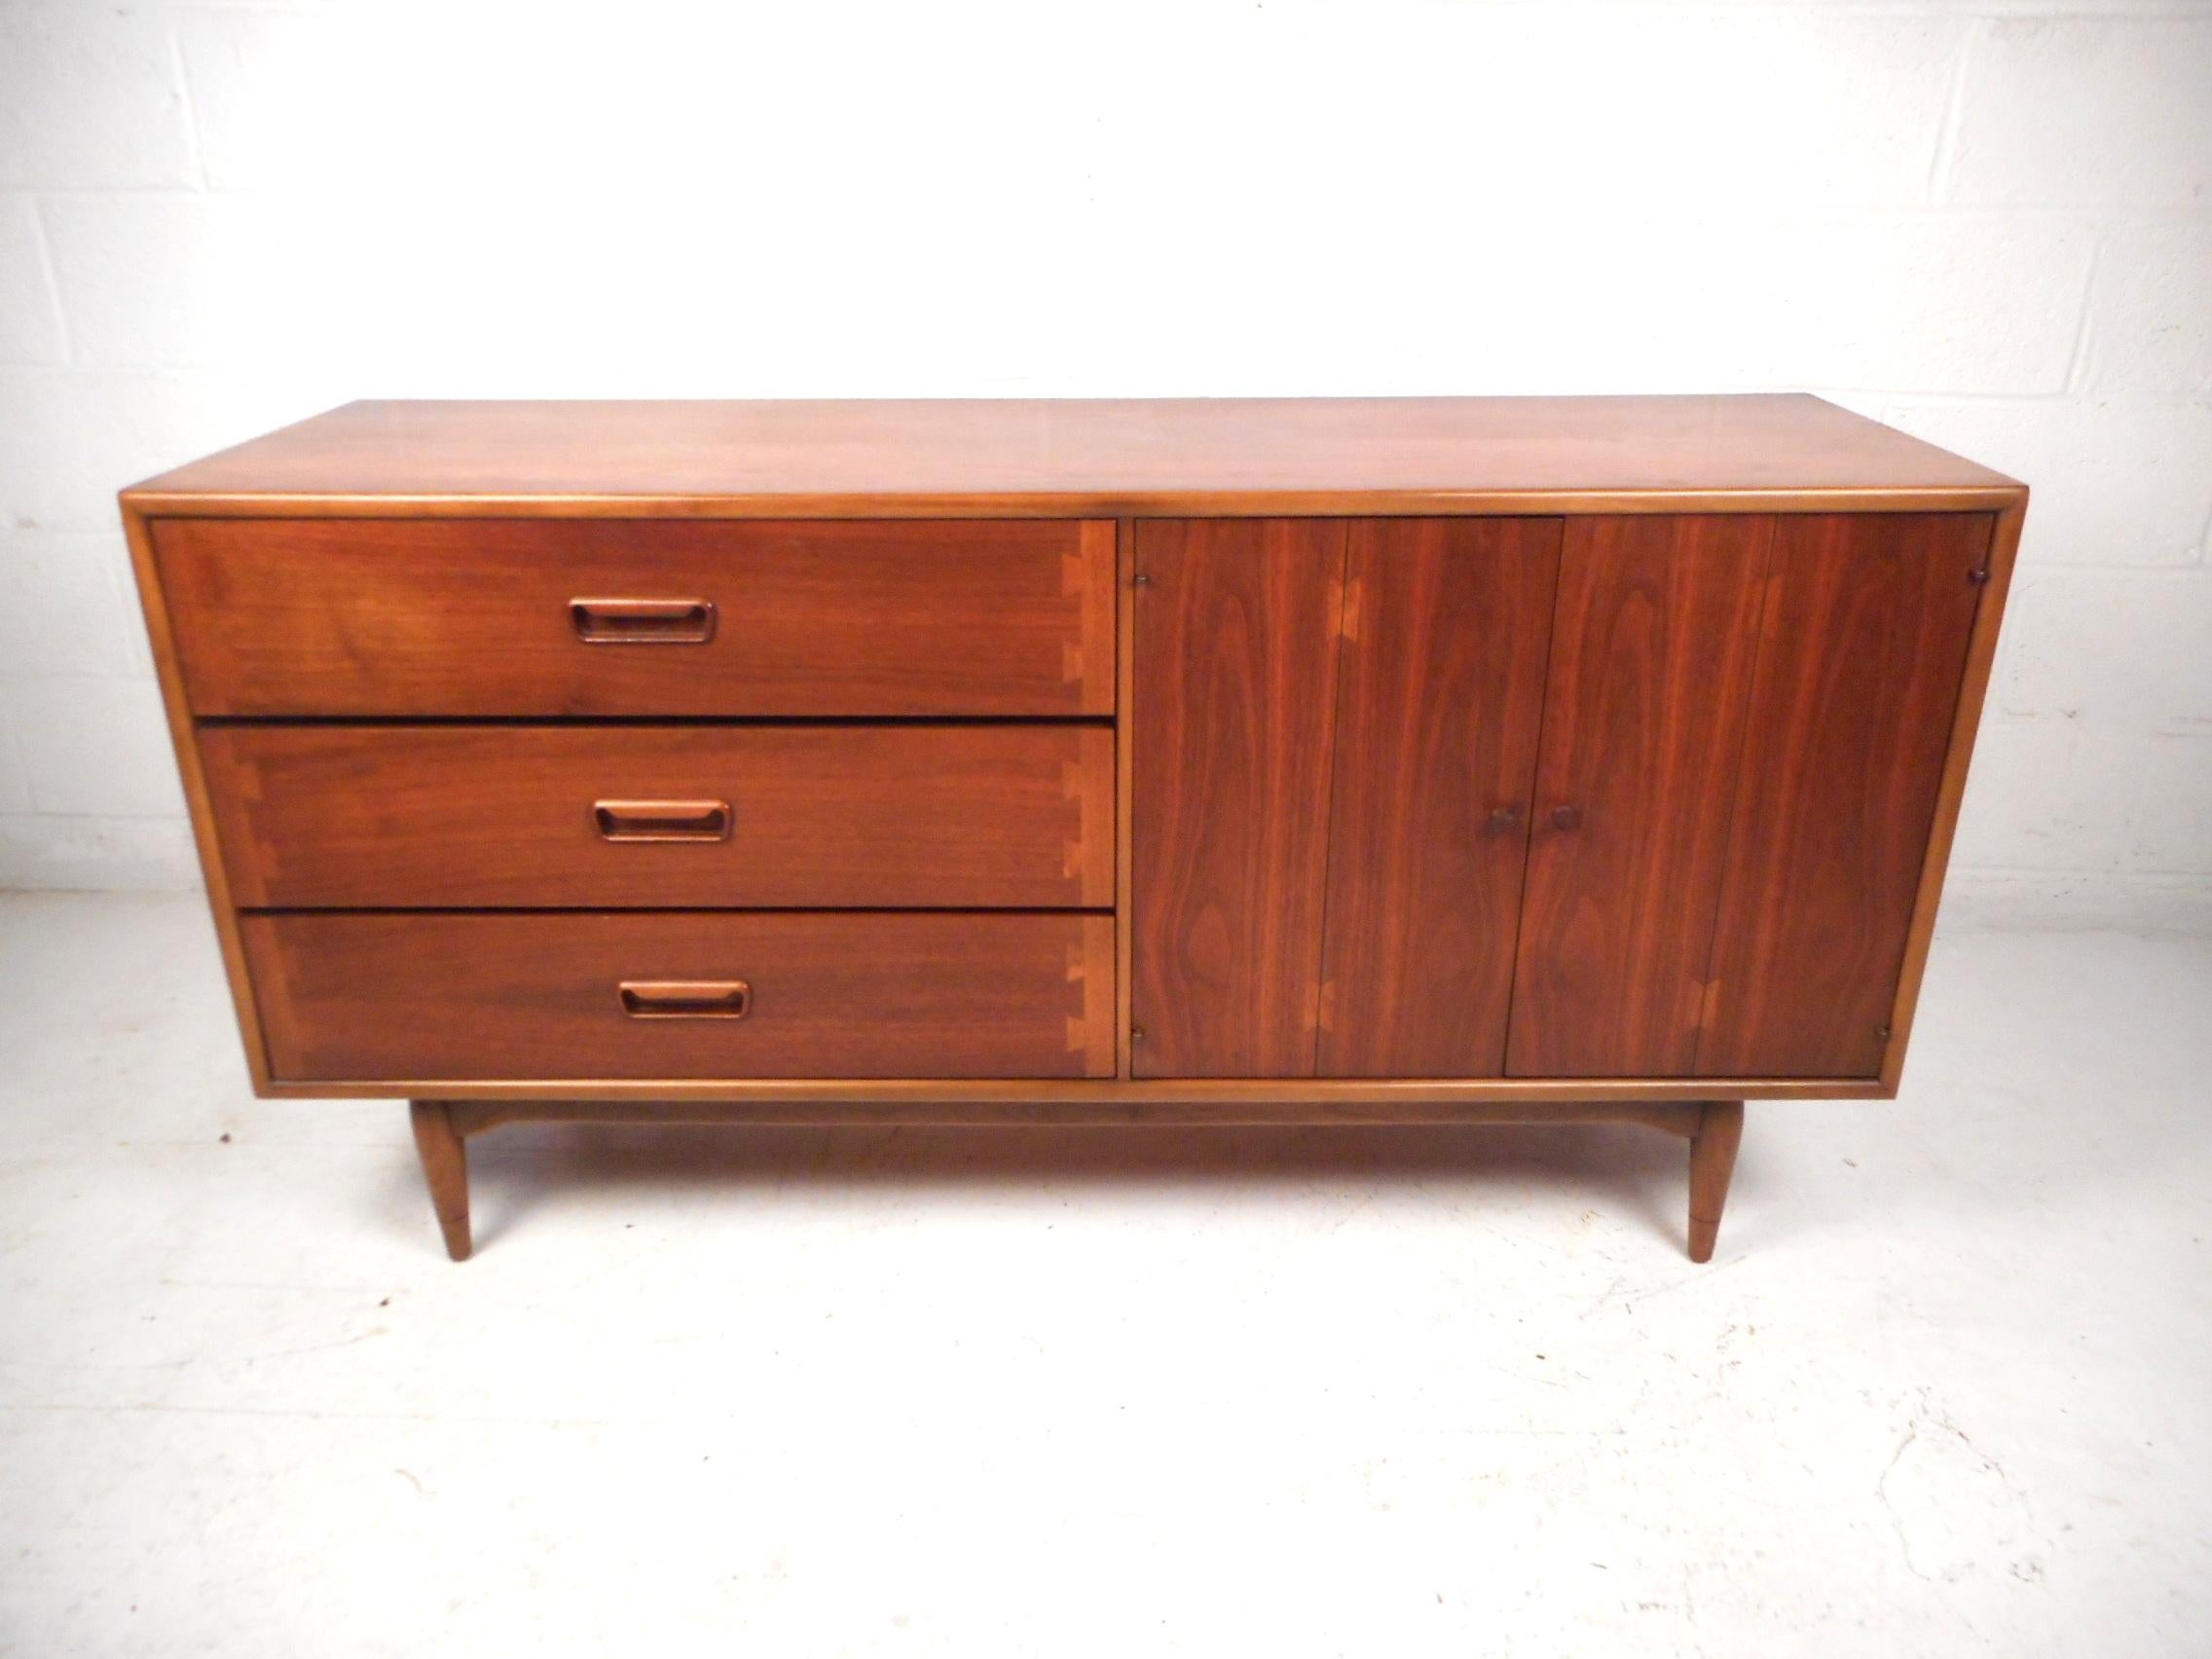 This impressive vintage modern credenza provides storage with style. This credenza boasts a sturdy and well-crafted walnut construction. Three dovetail-jointed drawers and a wide cabinet with one fixed shelf within it provide ample room to